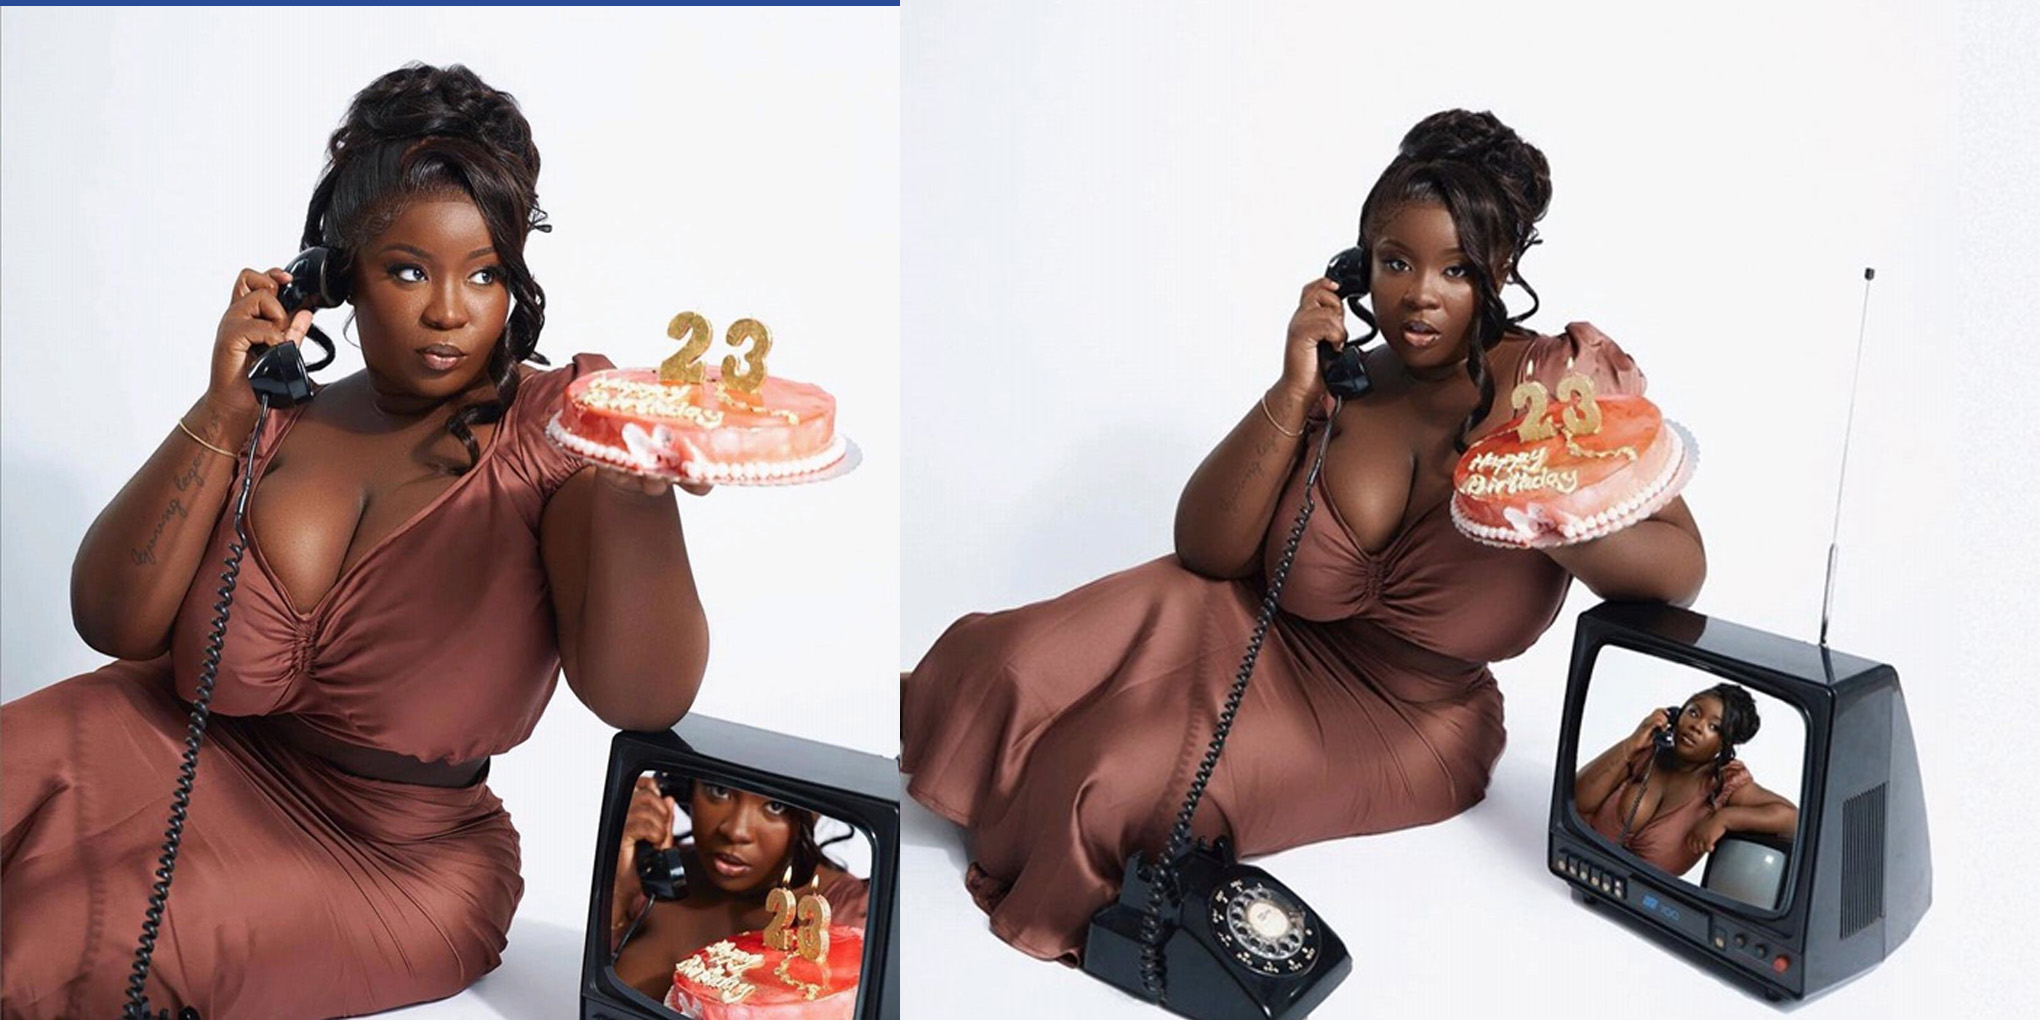 Actress Releases Birthday Pictures and Men are Salivating